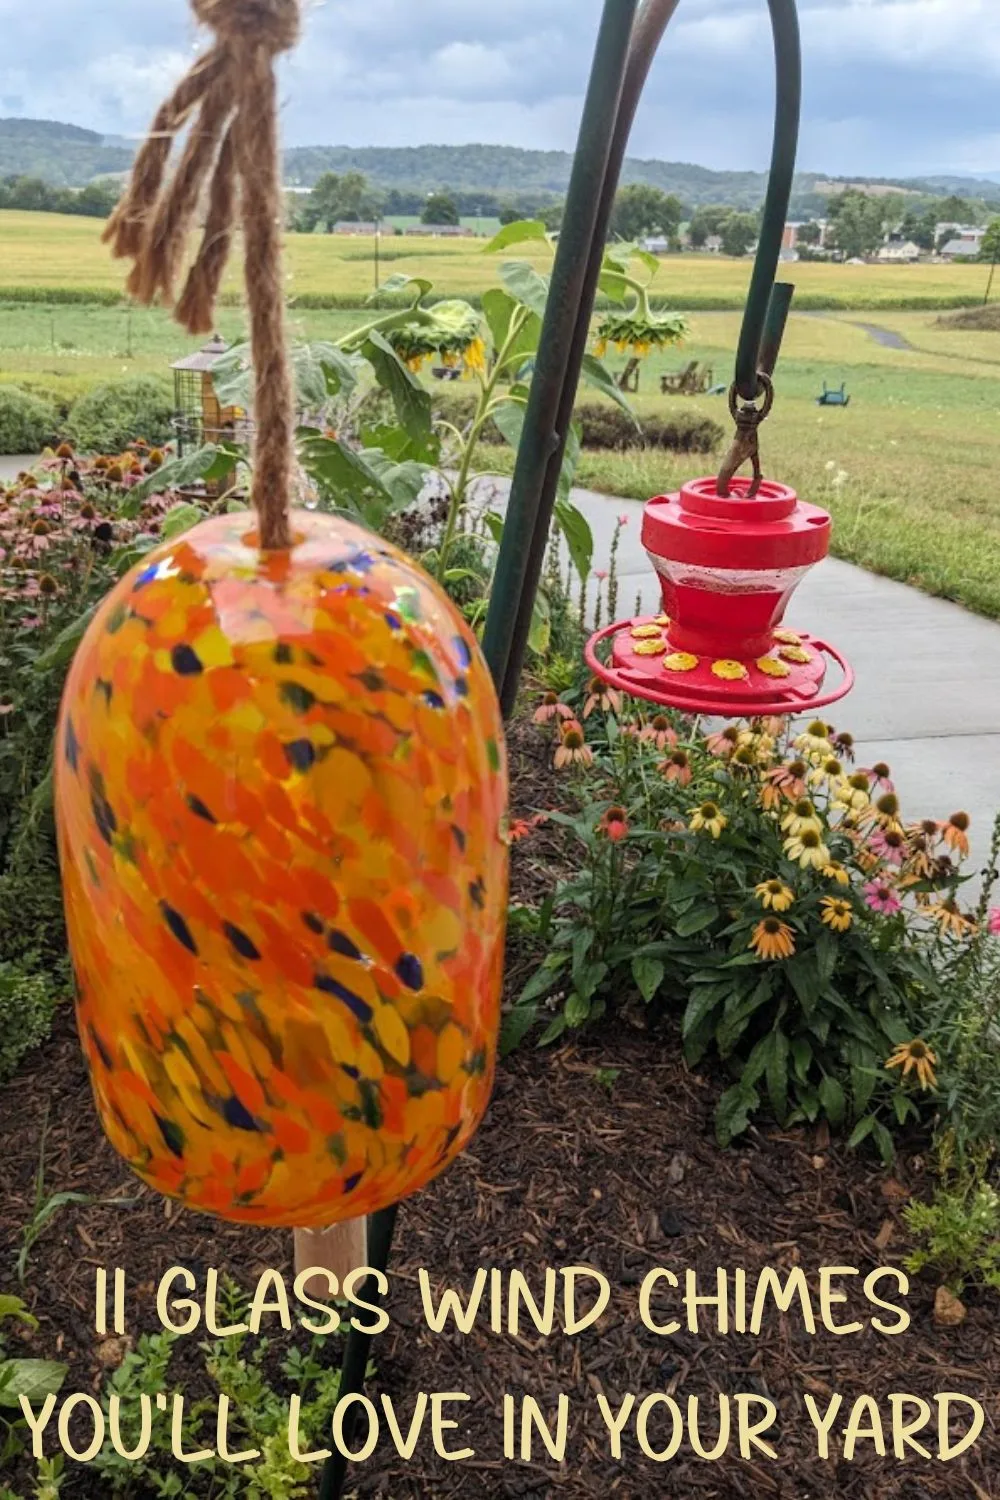 11 Glass Wind Chimes You'll Love In Your Yard.